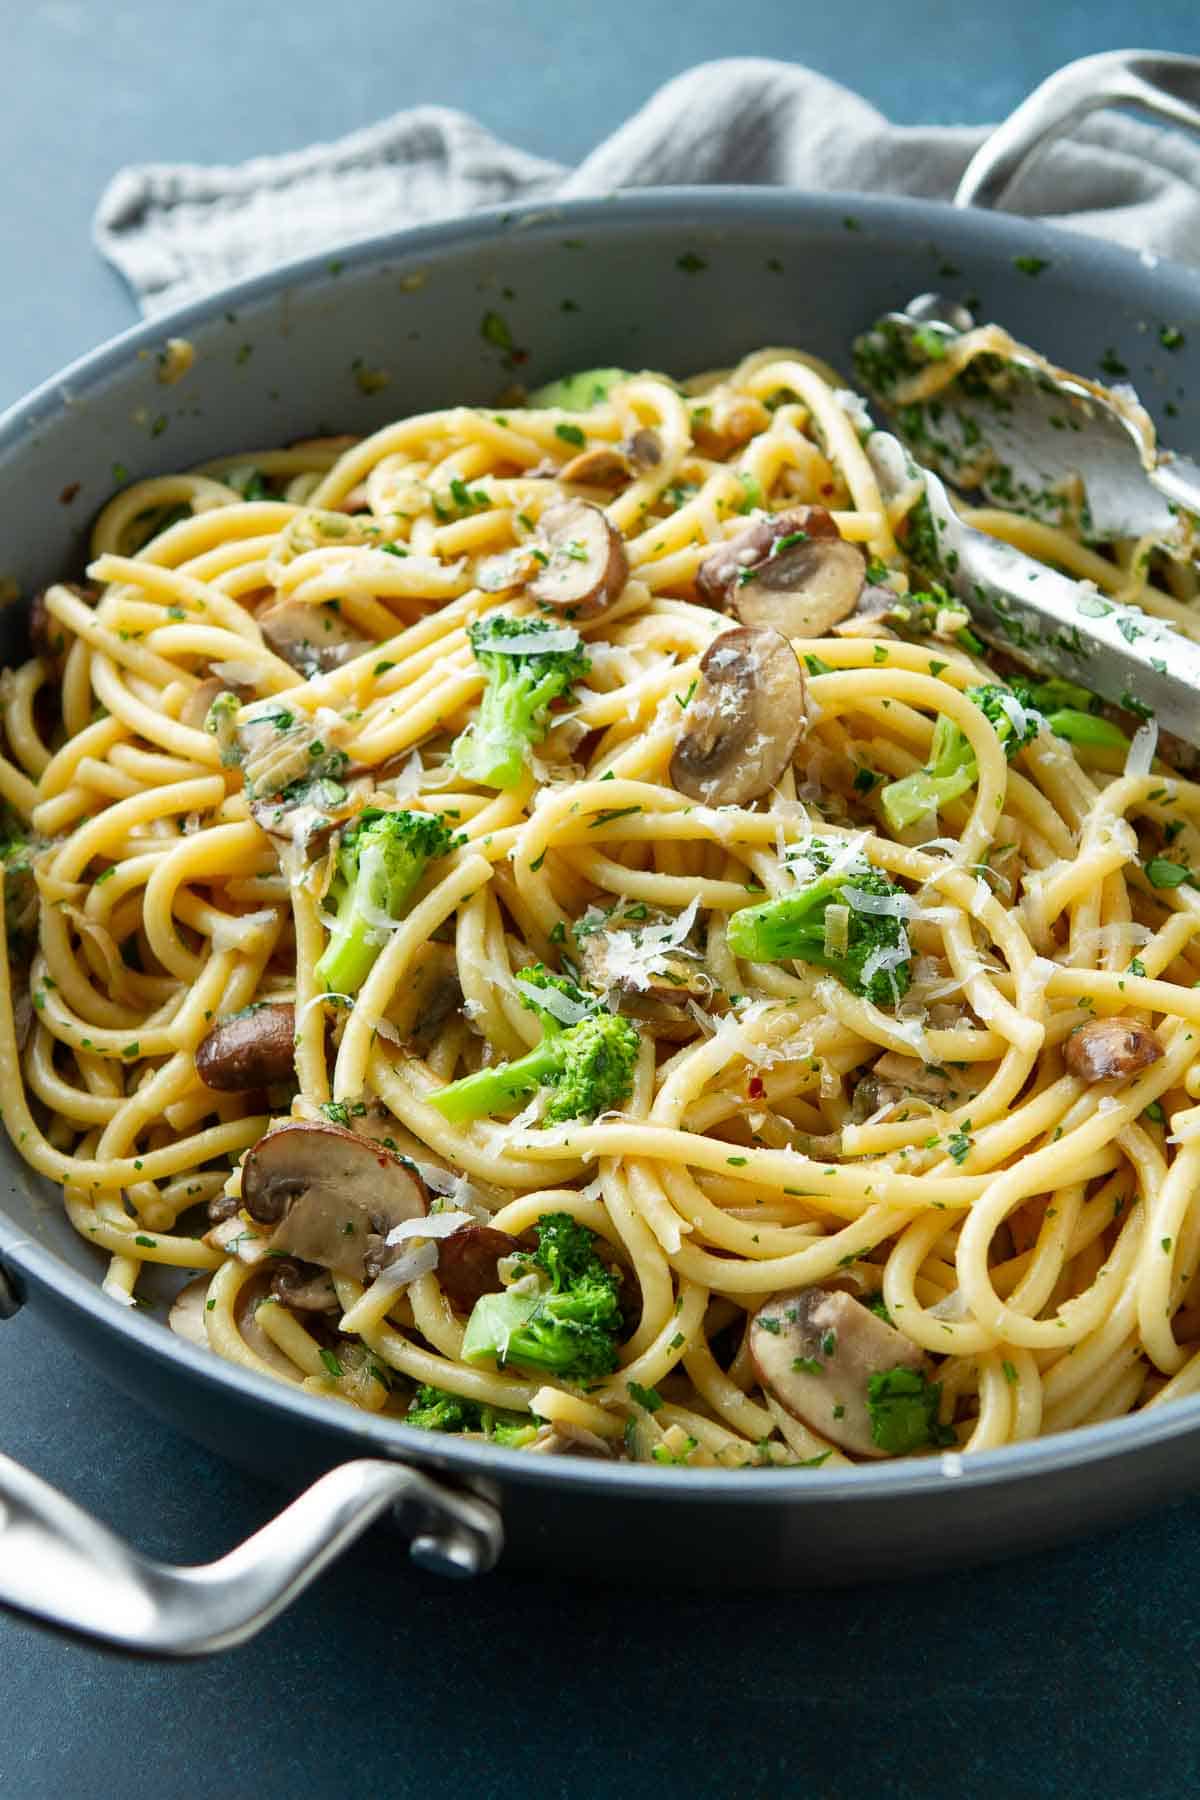 Bucatini pasta with broccoli and mushrooms in a large nonstick skillet.